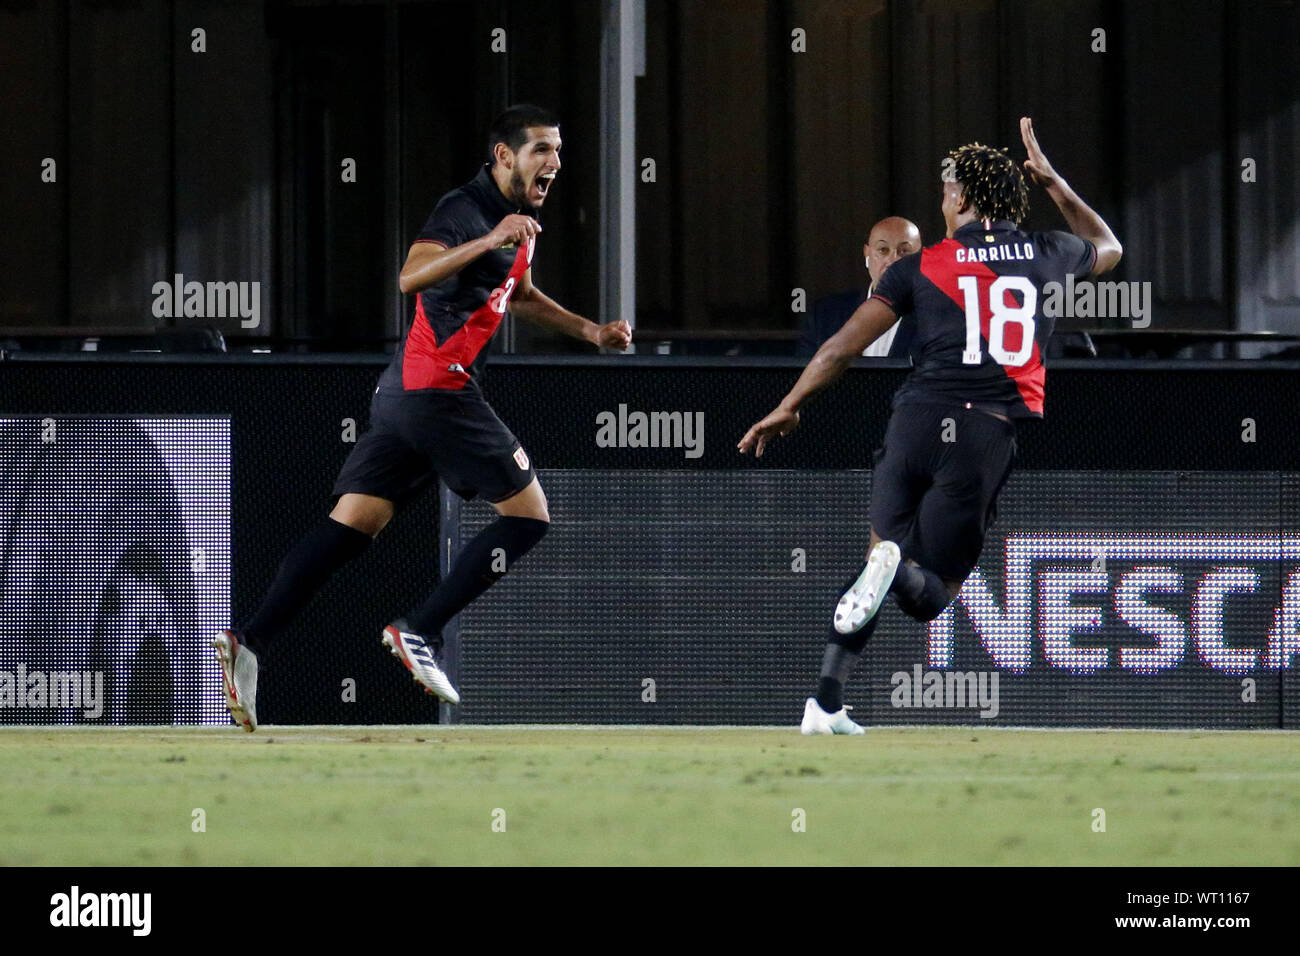 Los Angeles, California, USA. 10th Sep, 2019. Peru defender Luis Abram (2) celebrates his goal with Peru midfielder Andre Carrillo (18) during an International Friendly Soccer match between Brazil and Peru at the Los Angeles Memorial Coliseum in Los Angeles on Tuesday, September 10, 2019. Credit: Ringo Chiu/ZUMA Wire/Alamy Live News Stock Photo